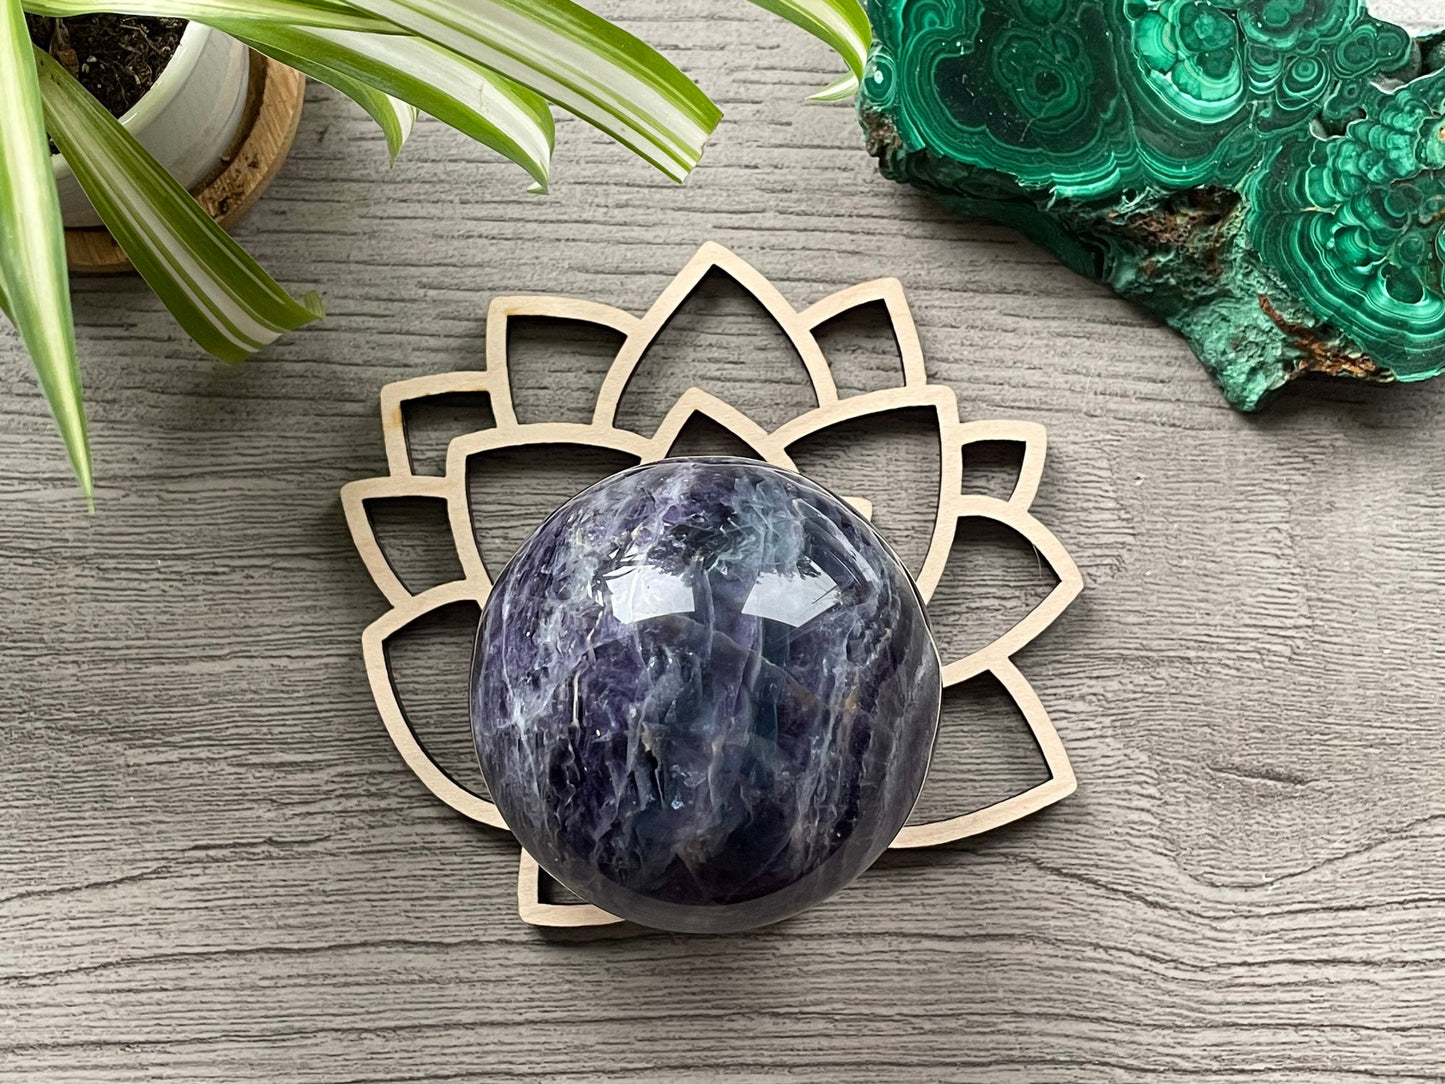 Pictured is a wood sphere stand in the shape of a lotus flower.